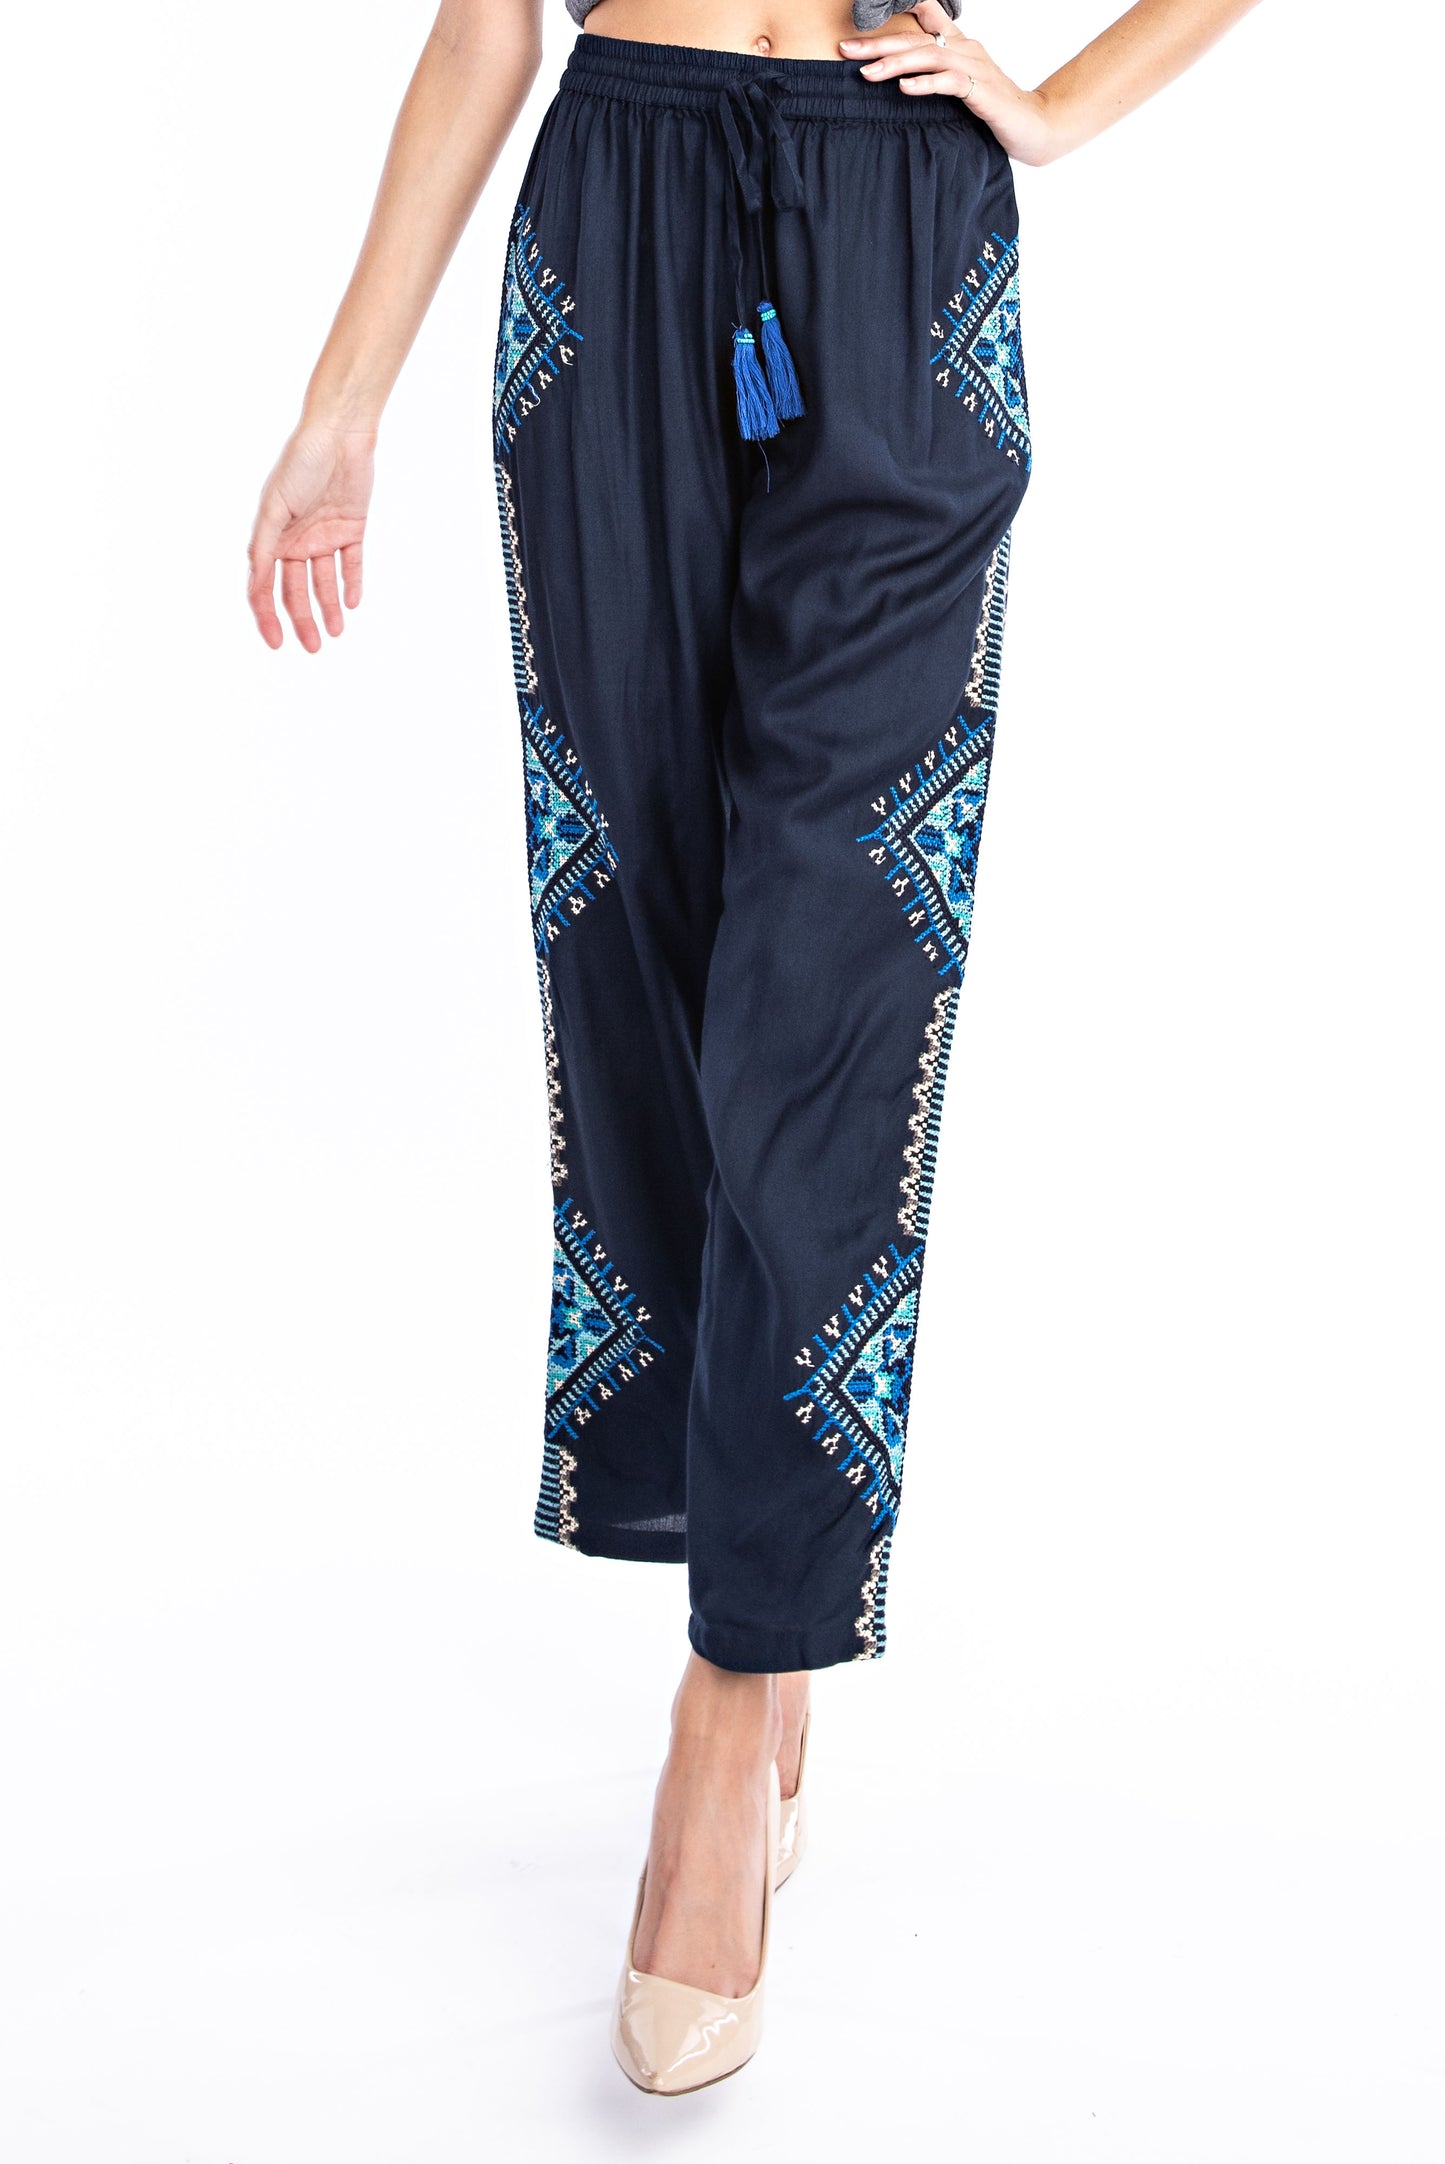 Midnight Blue Aztec Embroidered Pant - Solitaire Fashions